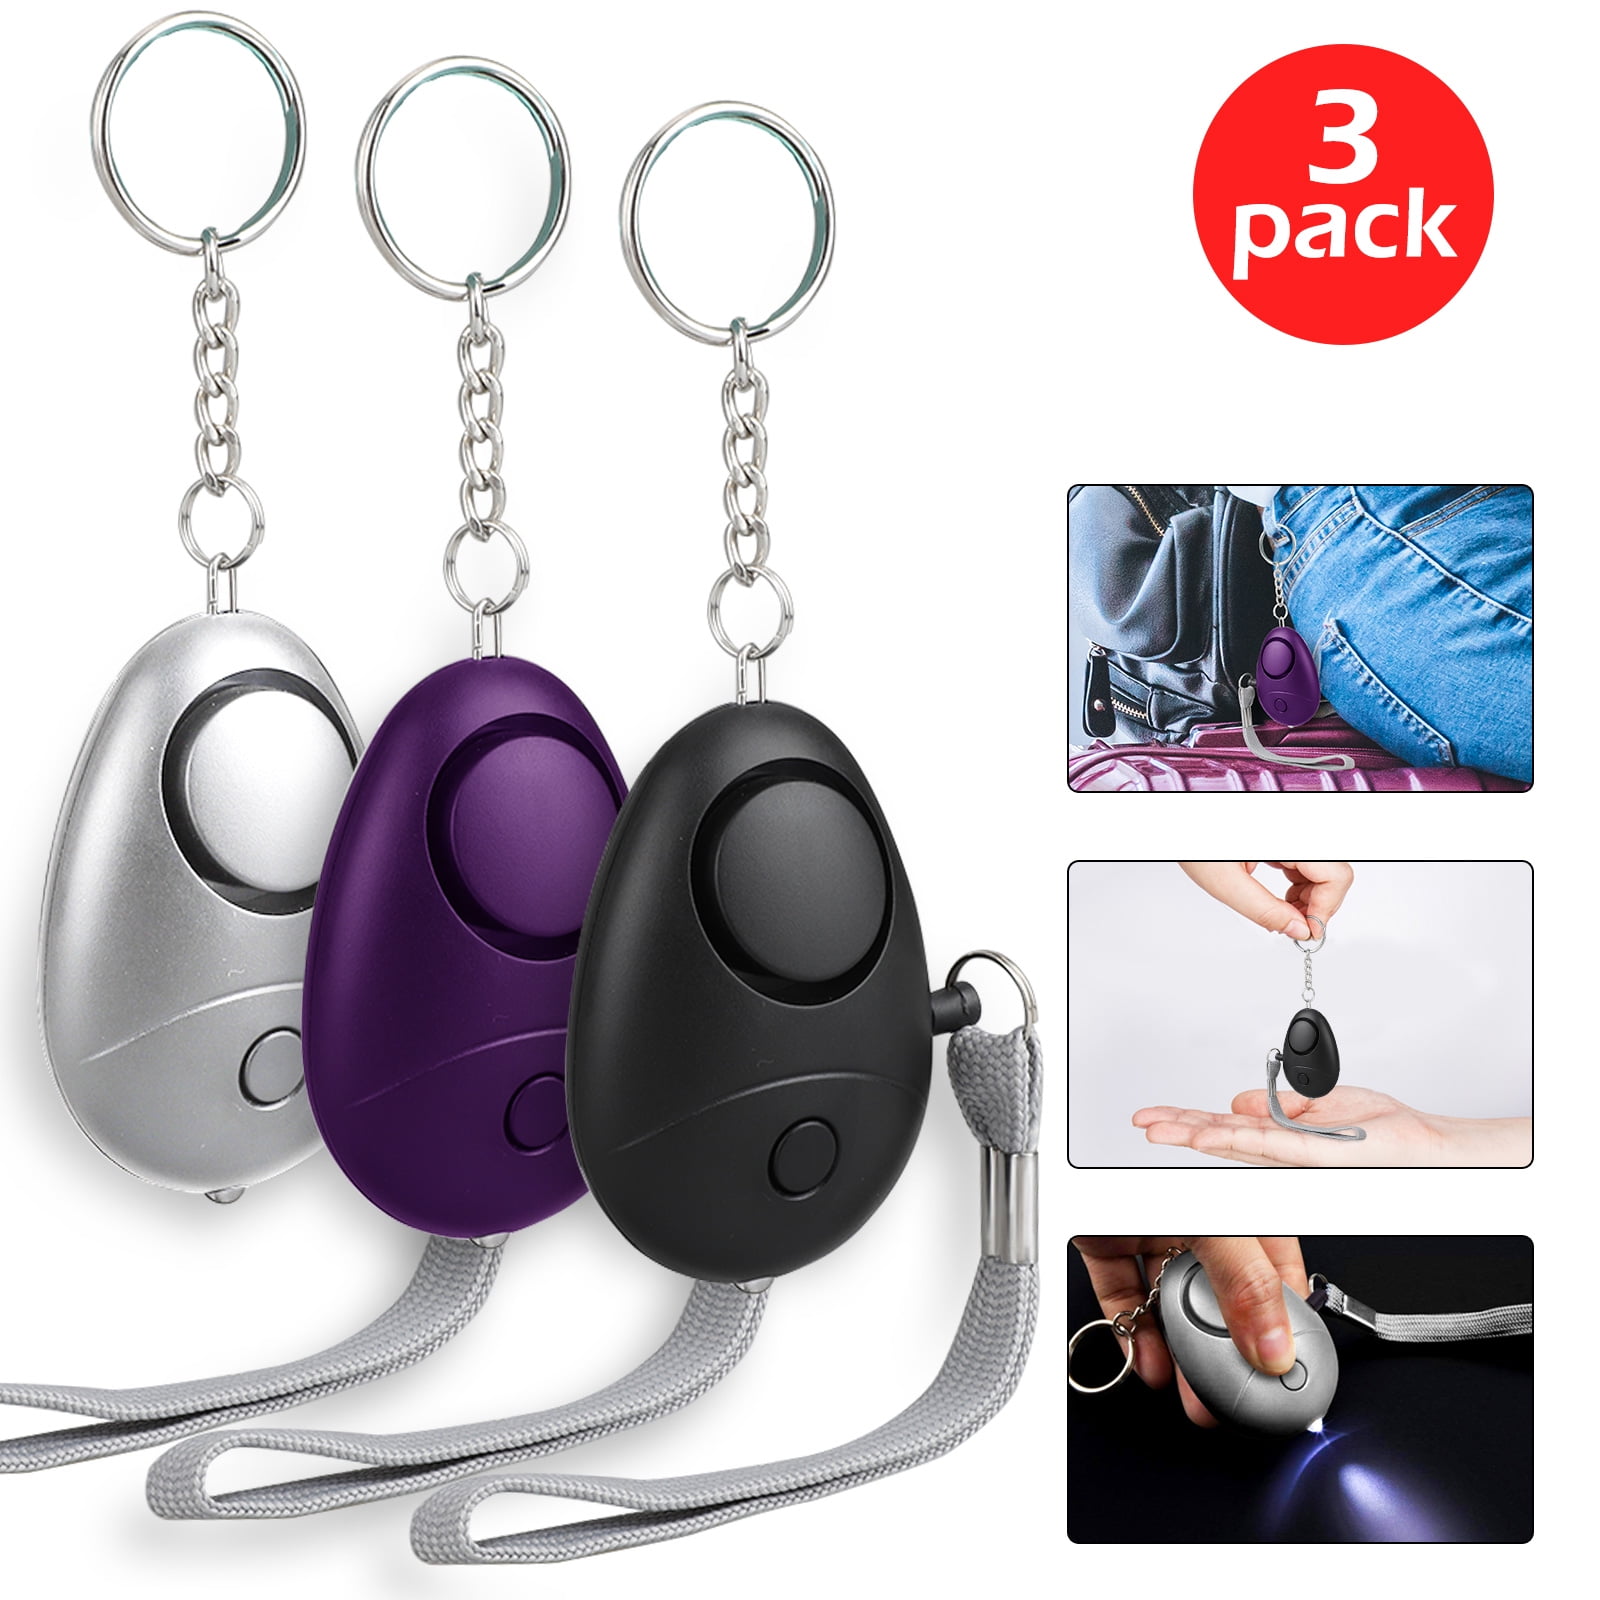 130 DB Good for Who Work at Night Emergency Personal Alarm New Keychain/The Wolf Alarm/Elderly/Kids Tracker As A Bag Decoration Safety/Attack/Protection/Panic/Self Defense Electronic Device